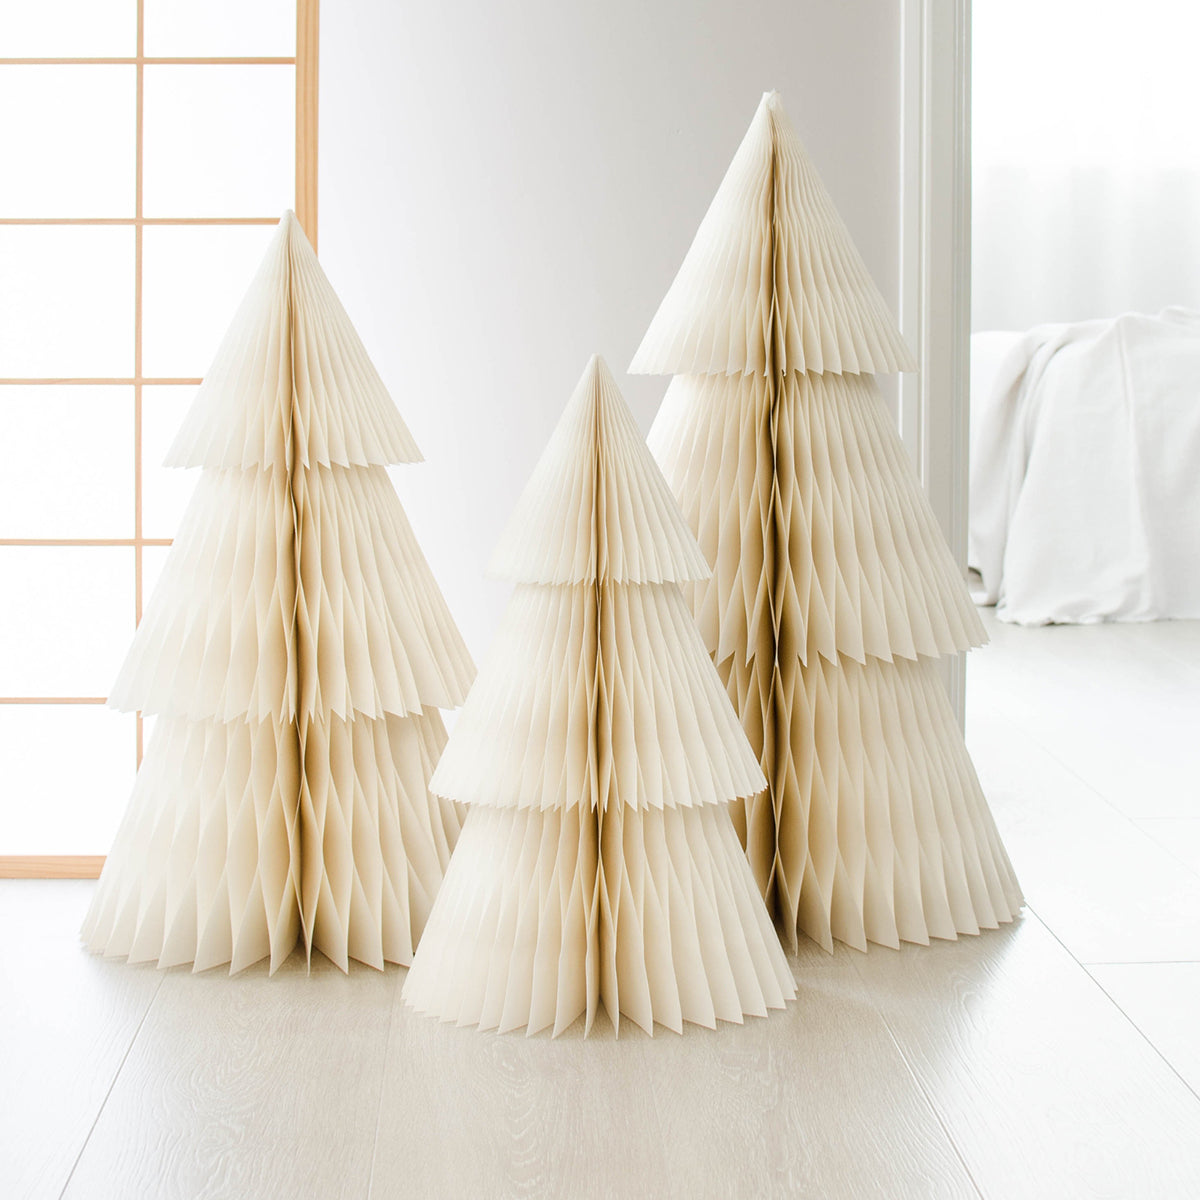 Deluxe Paper Tree Standing Off White 95cm